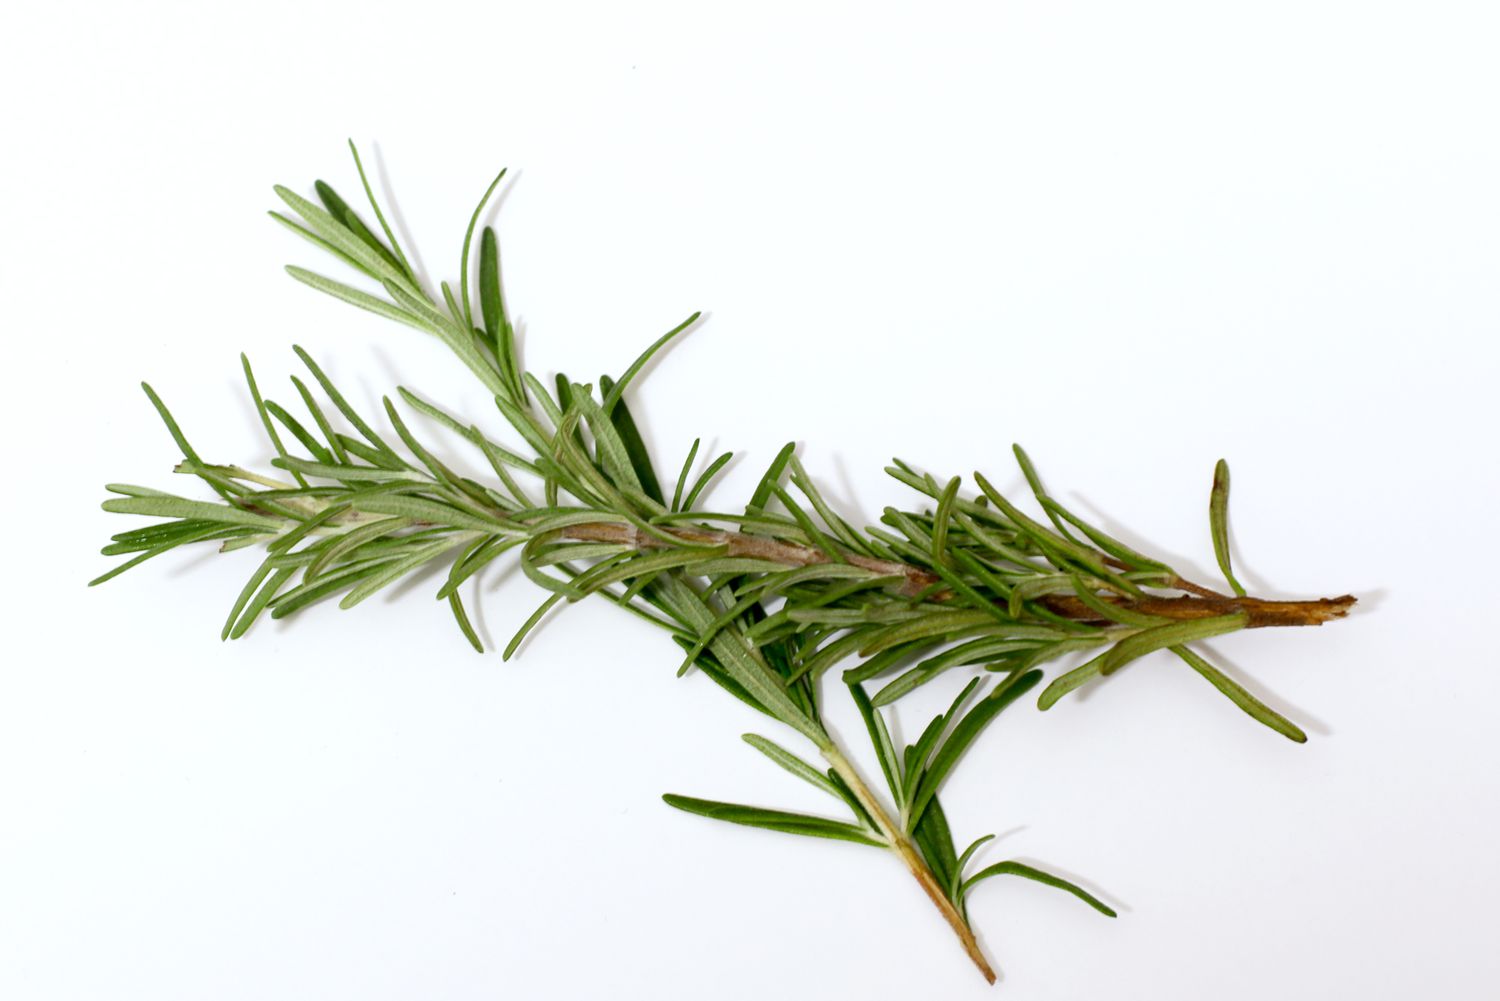 What Is A Rosemary Sprig?